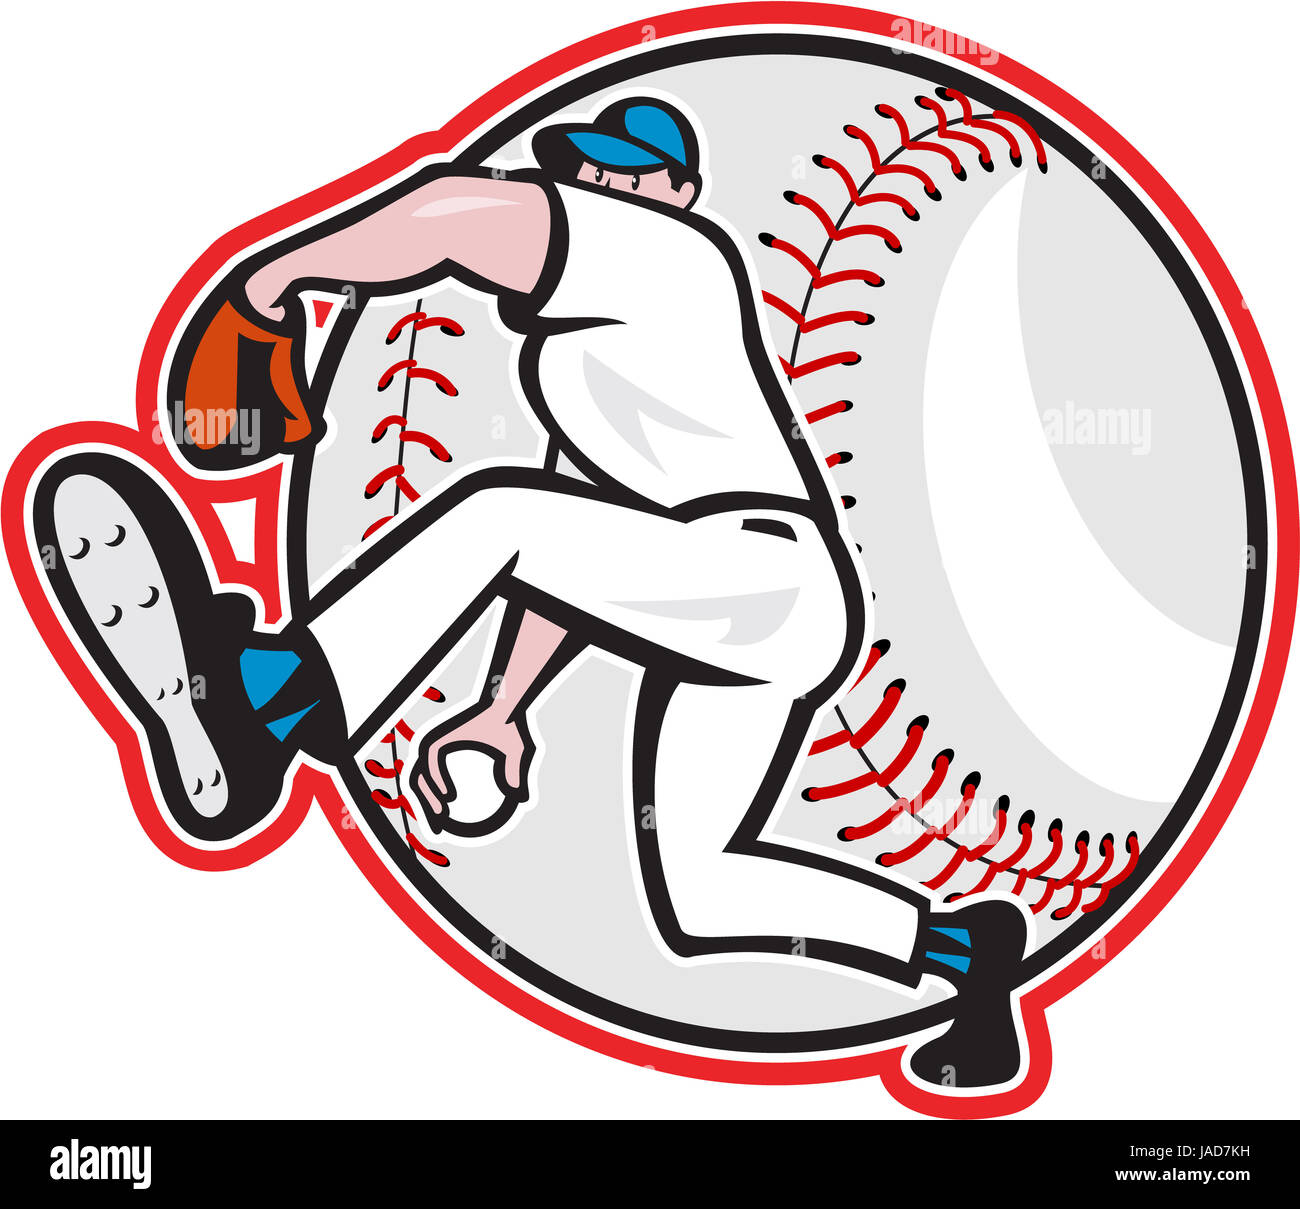 Illustration of an american baseball player pitcher outfielder throwing ball isolated on white background done in cartoon style. Stock Photo